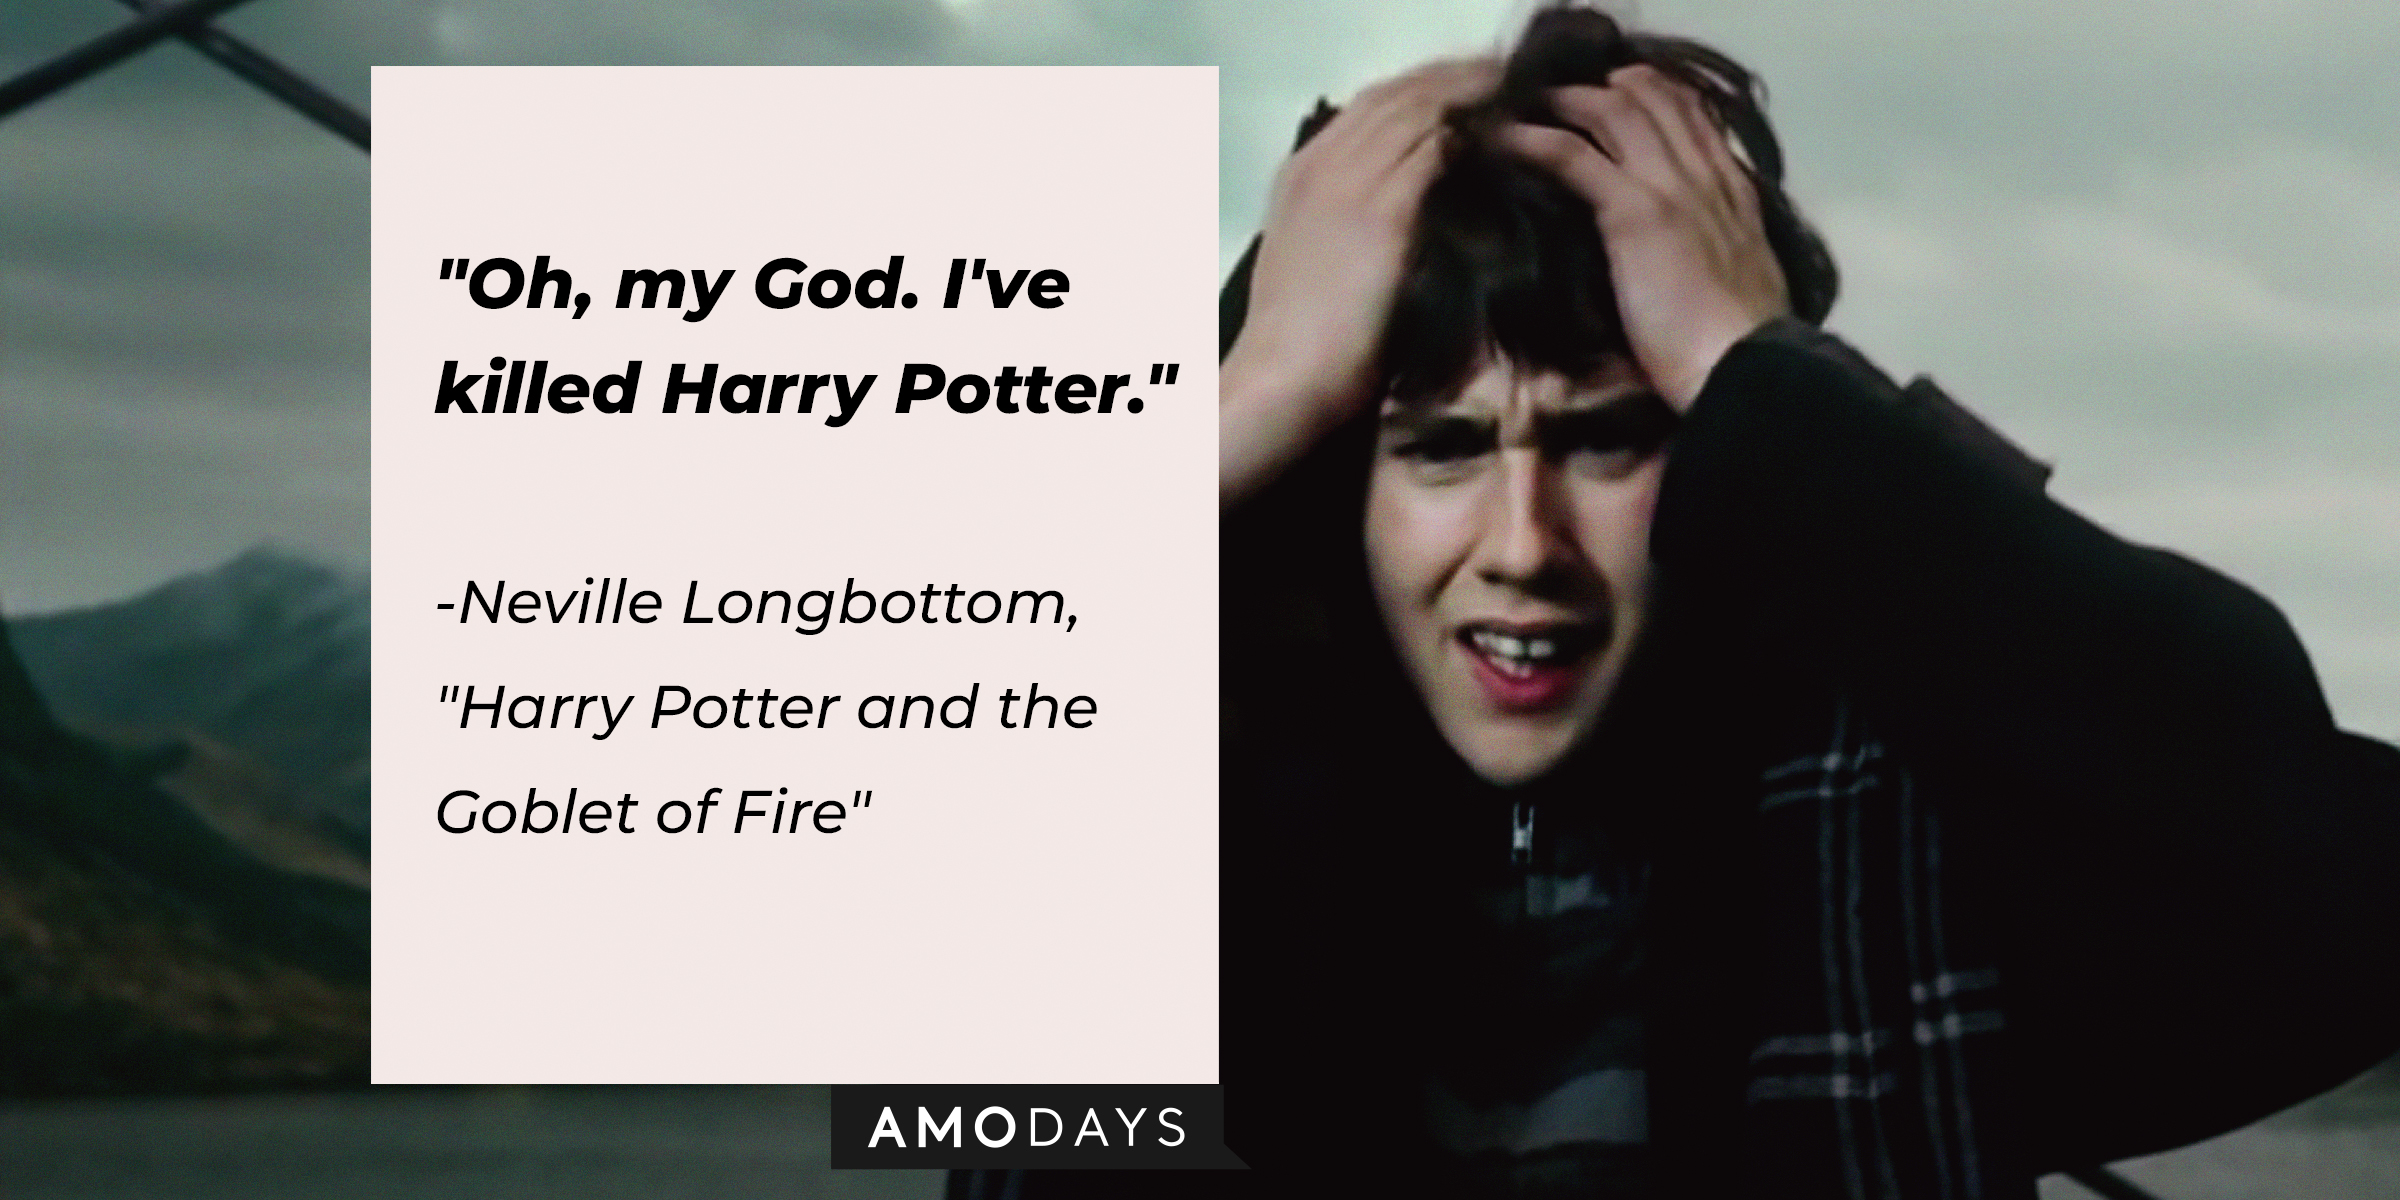 Neville Longbottom with his quote: "Oh, my God. I've killed Harry Potter." | Source: Facebook.com/harrypotter